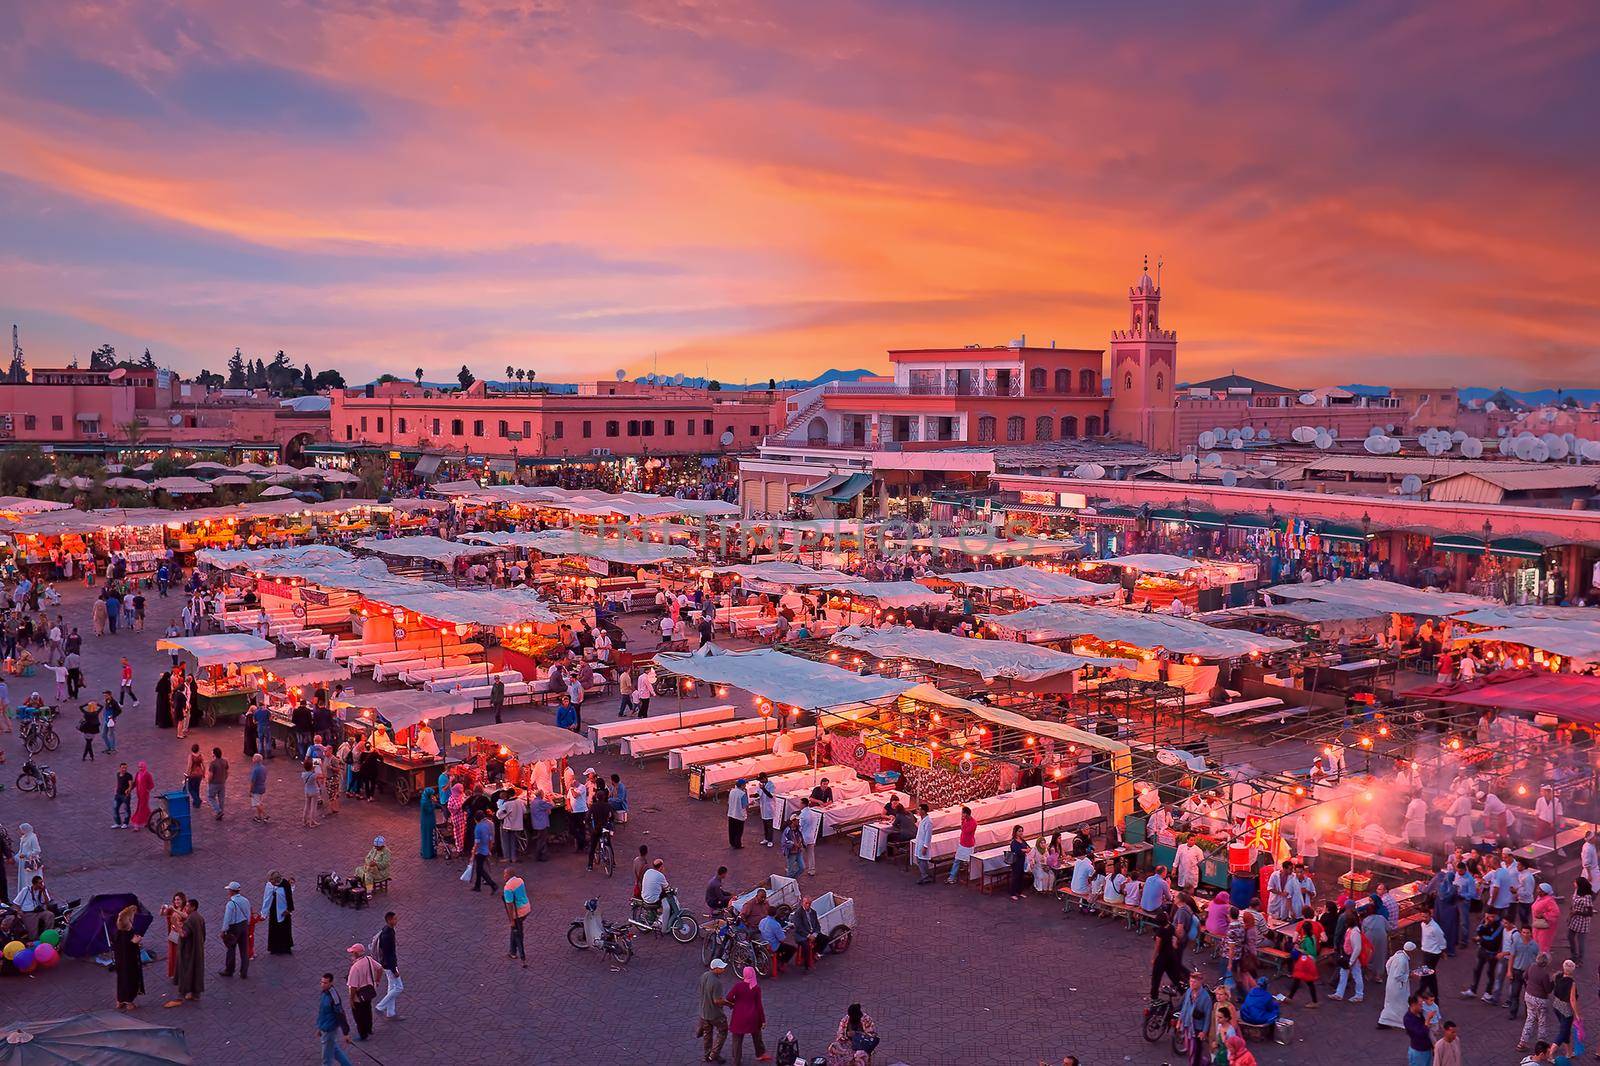 MARRAKESH, MOROCCO - October 22, 2013: Evening on Djemaa El Fna Square with Koutoubia Mosque, Marrakech, Morocco